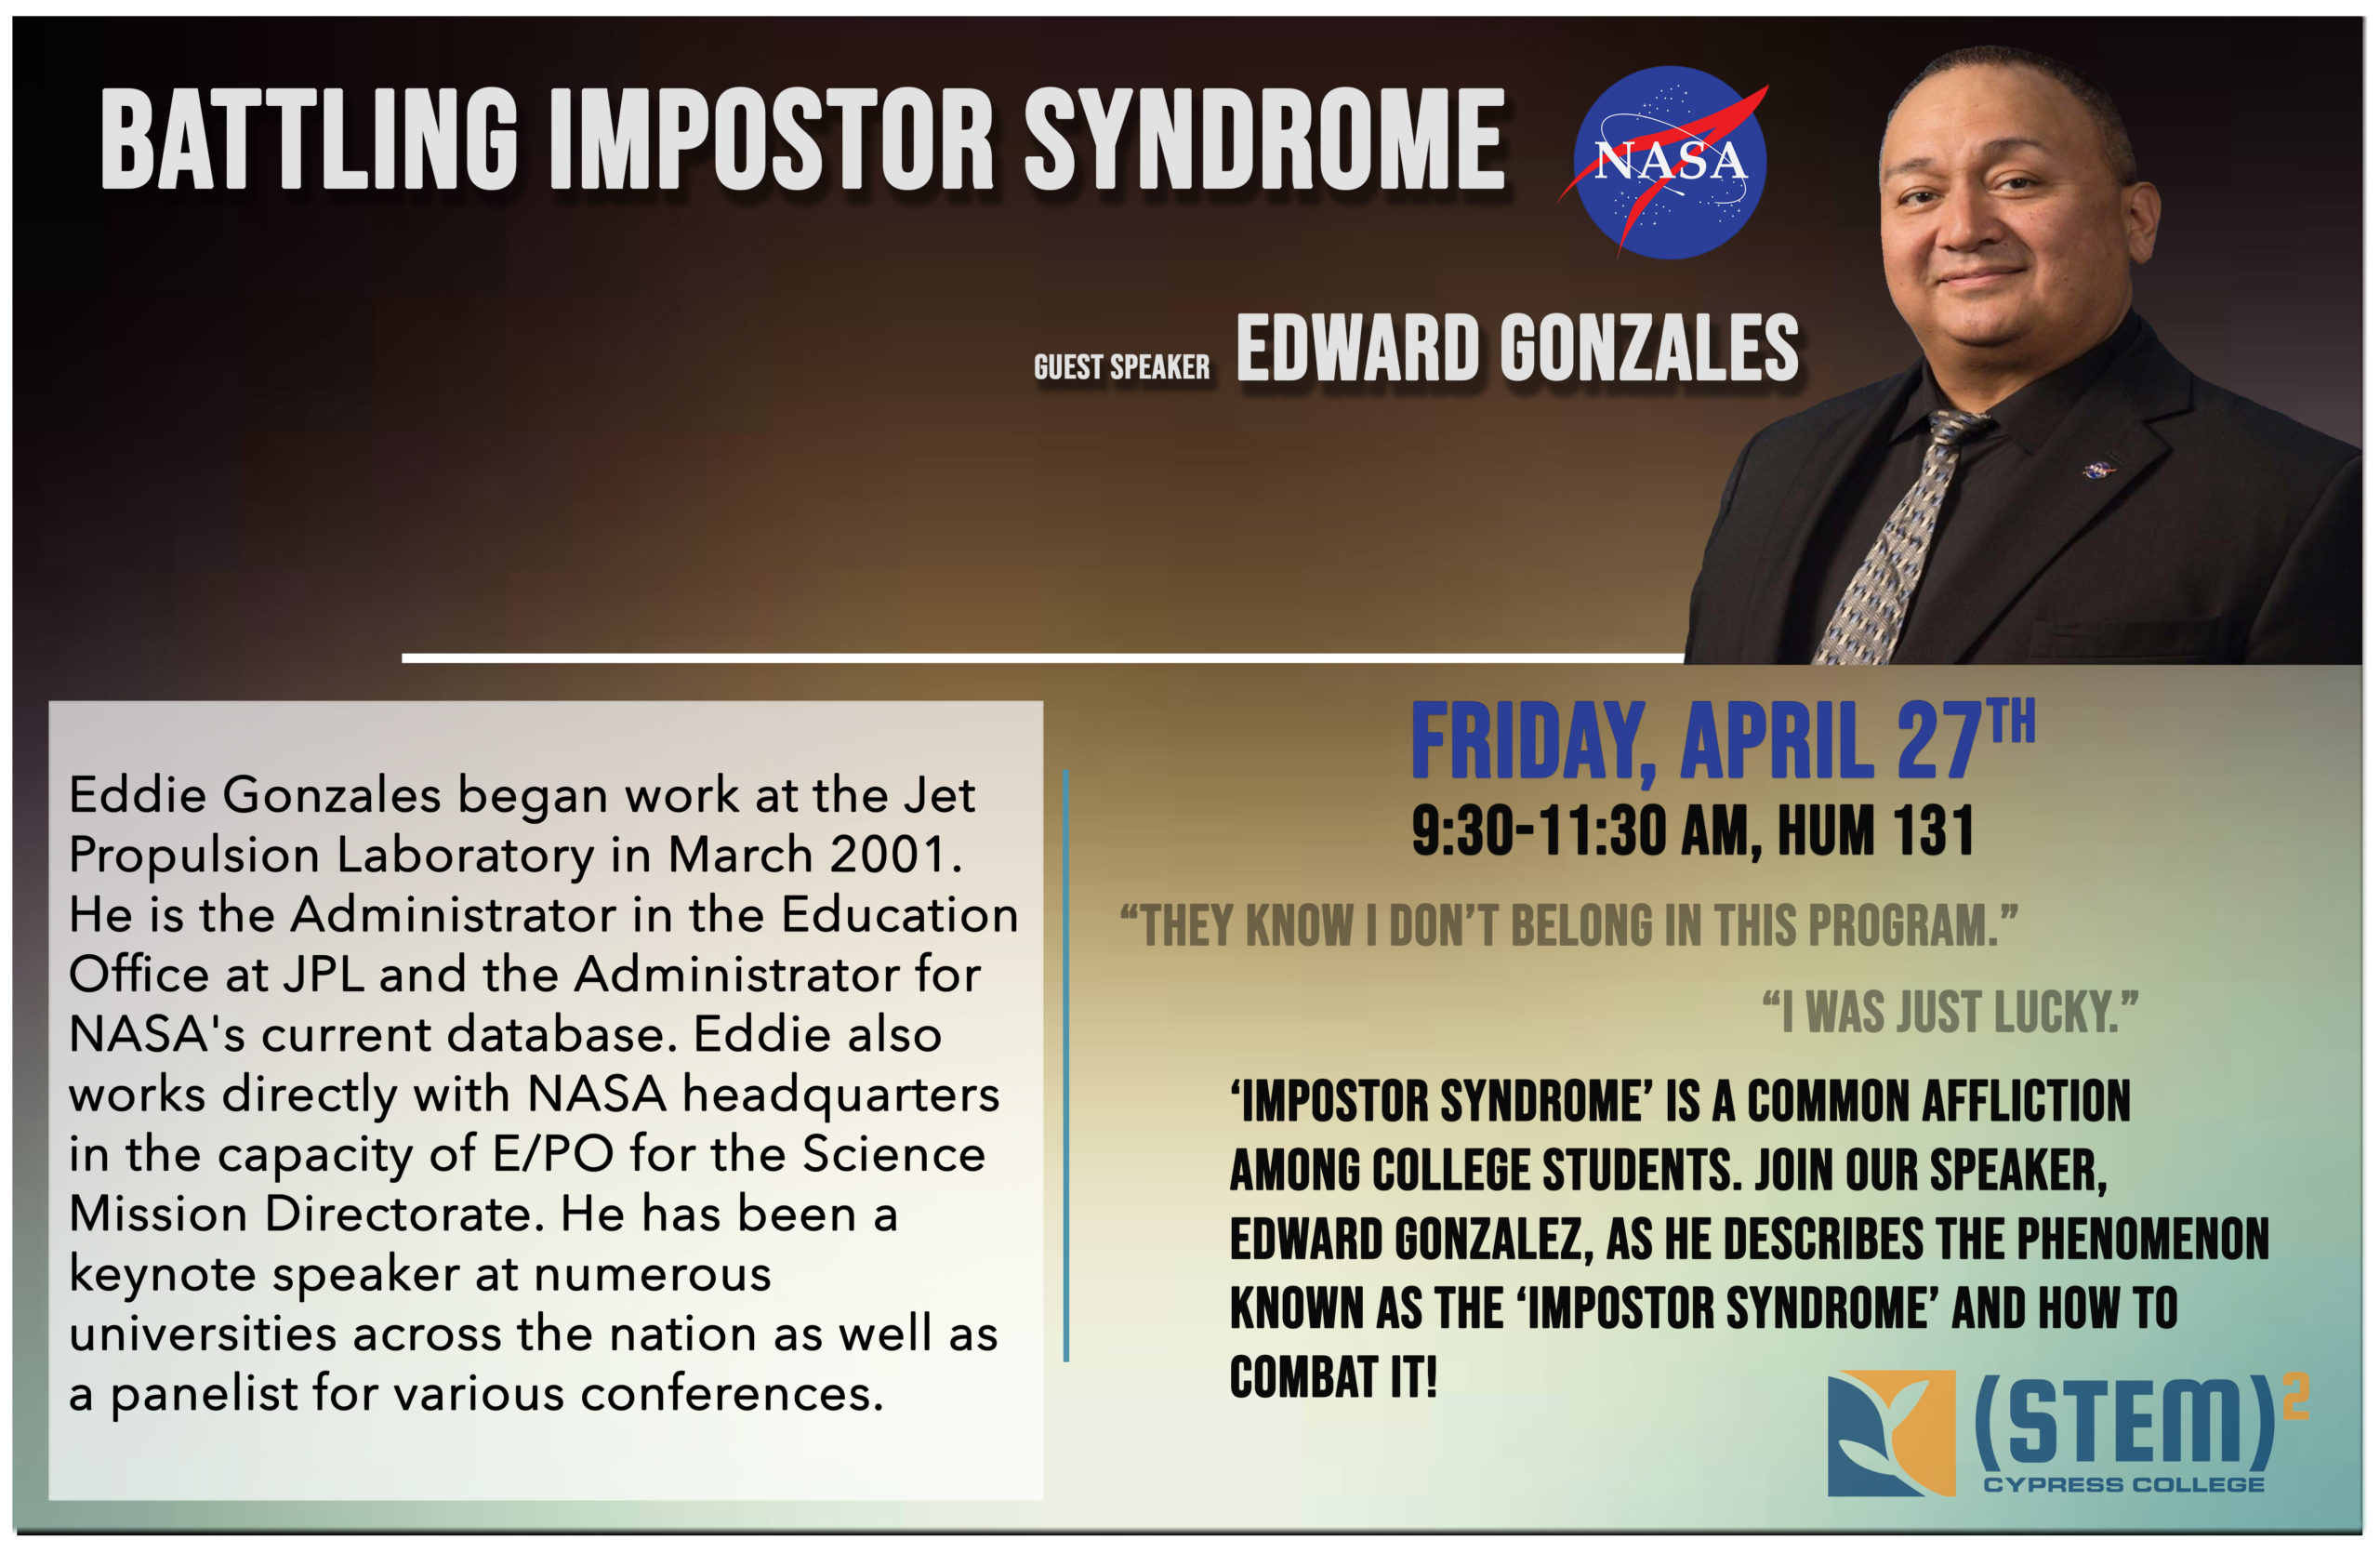 Battling Impostor Syndrome with Edward Gonzales flyer